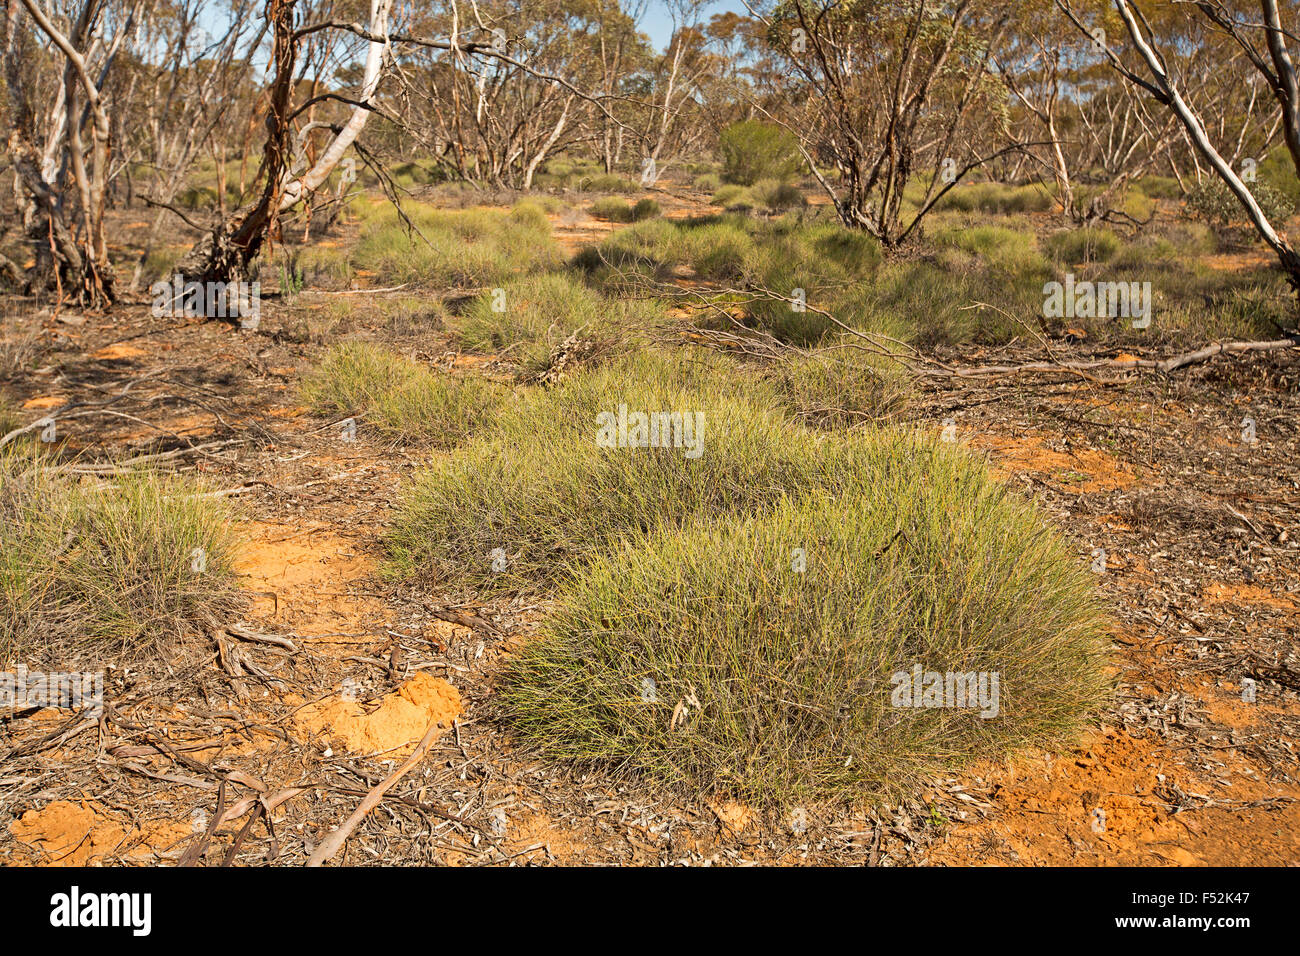 Australian outback landscape with mounds of spinifex / porcupine grass growing among mallee woodlands in Mungo National Park NSW Australia Stock Photo